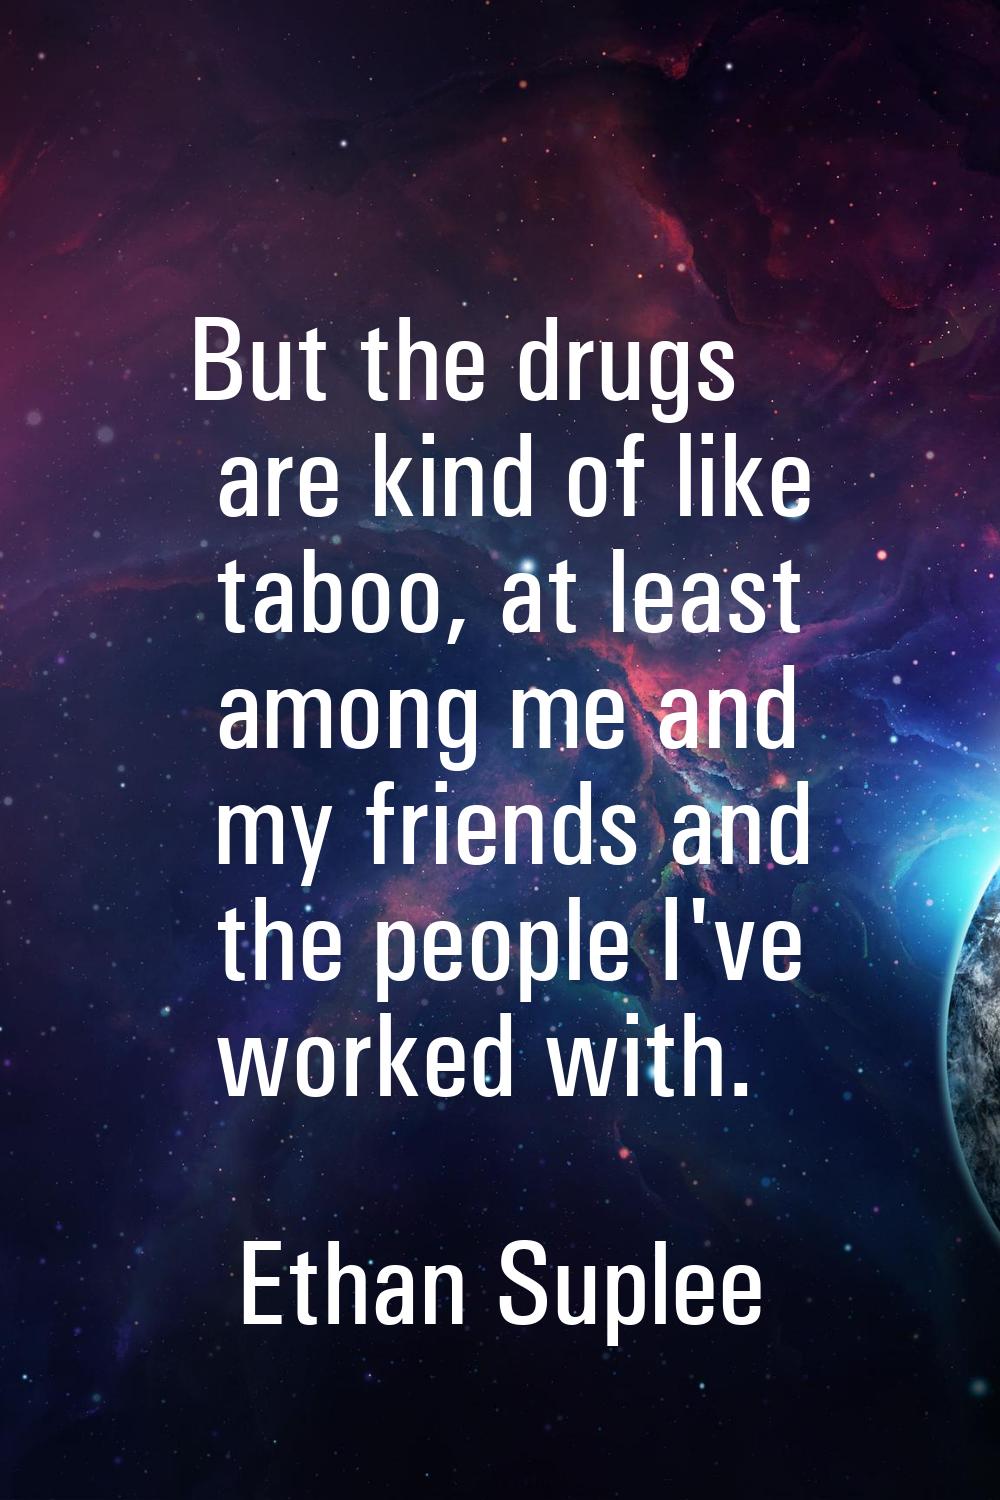 But the drugs are kind of like taboo, at least among me and my friends and the people I've worked w